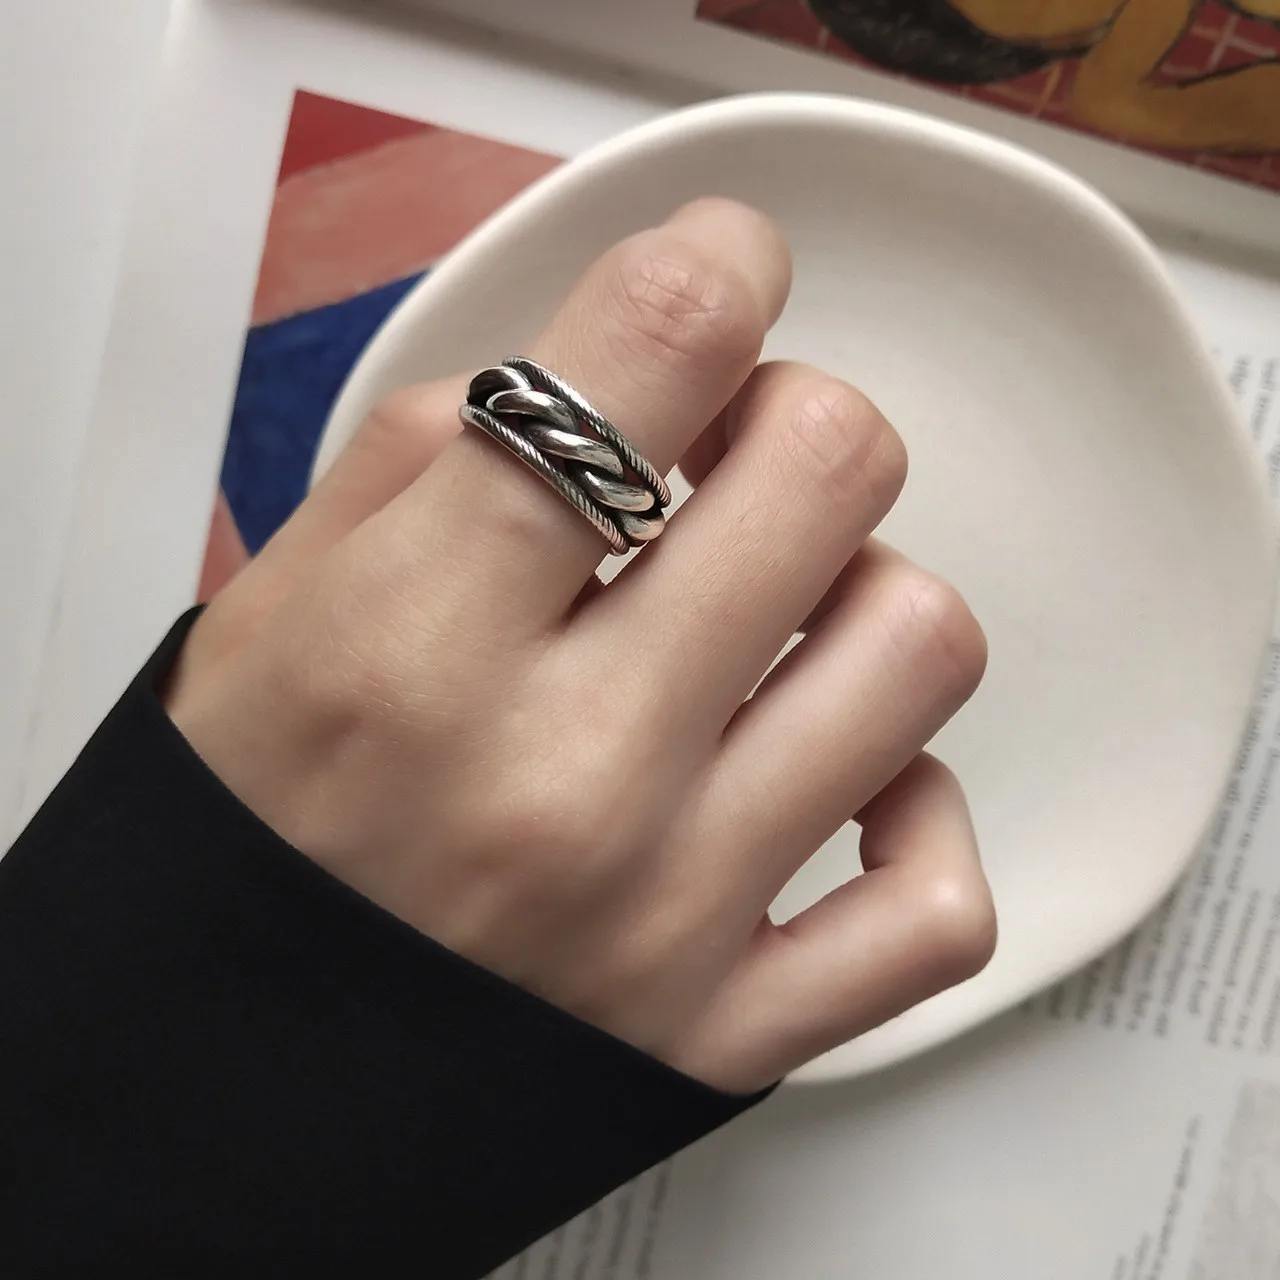 

Hot Sell Vintage Cross Design Thai Silver Female Finger Ring Original Jewelry For Women Party Gifts No Fade Accessories